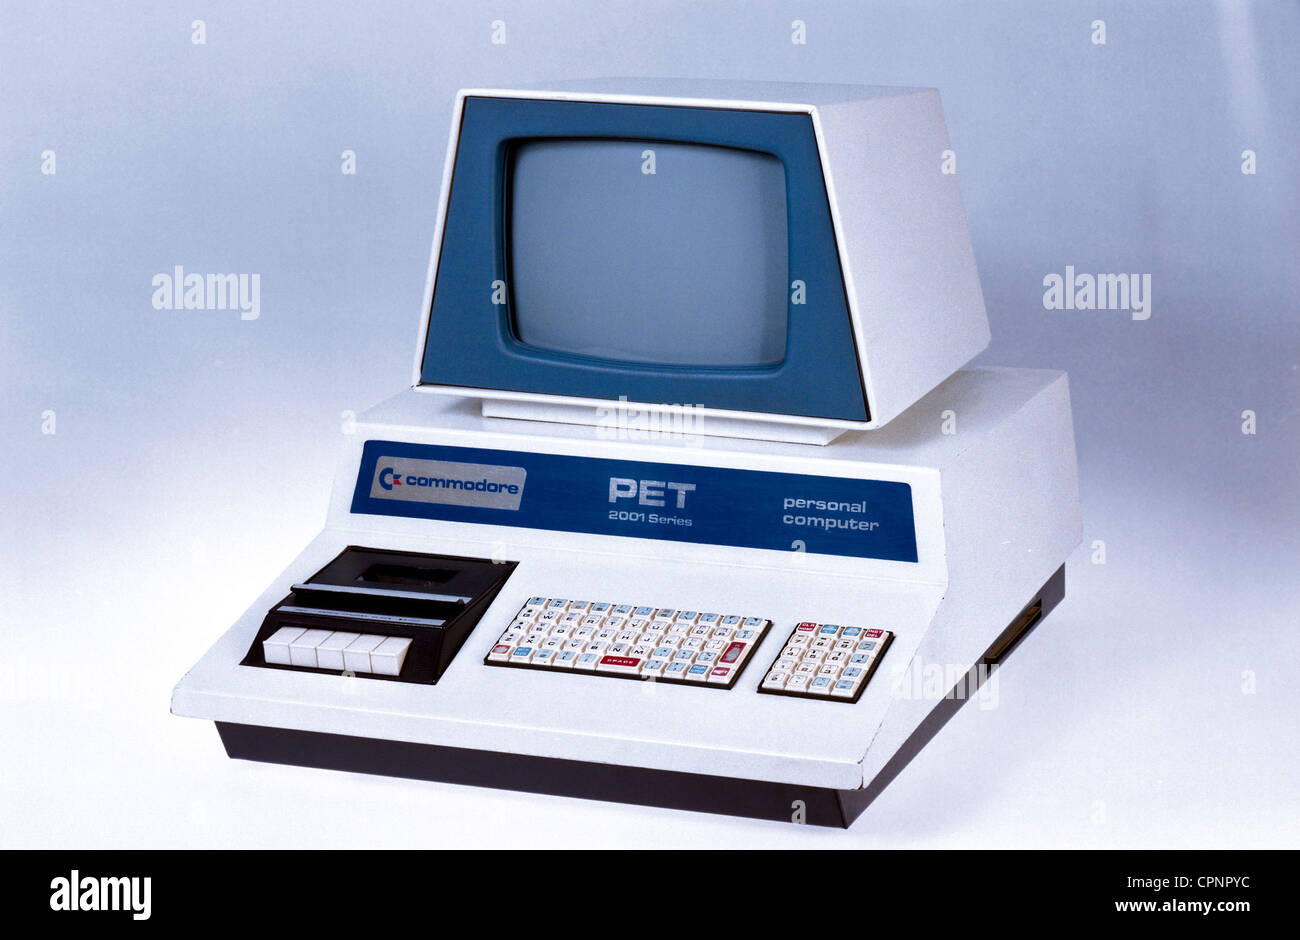 computing / electronics,computer,first complete personal computer of the world,Commodore PET 2001,built-in datasette as bulk storage,version name PET standing for Personal Electronic Transactor,USA,1977,memory,data storage,processor 6502,1 megahertz,keyboard,keyboards,integrated monitor,black-white,home computer,invention personal computer,history of computer,70s,W.M.Weber collection,EDP,IT,hardware,compact unit,compact,studio shot,still,object,objects,data handling,data processings,automatic data processing,electronic data proc,Additional-Rights-Clearences-Not Available Stock Photo